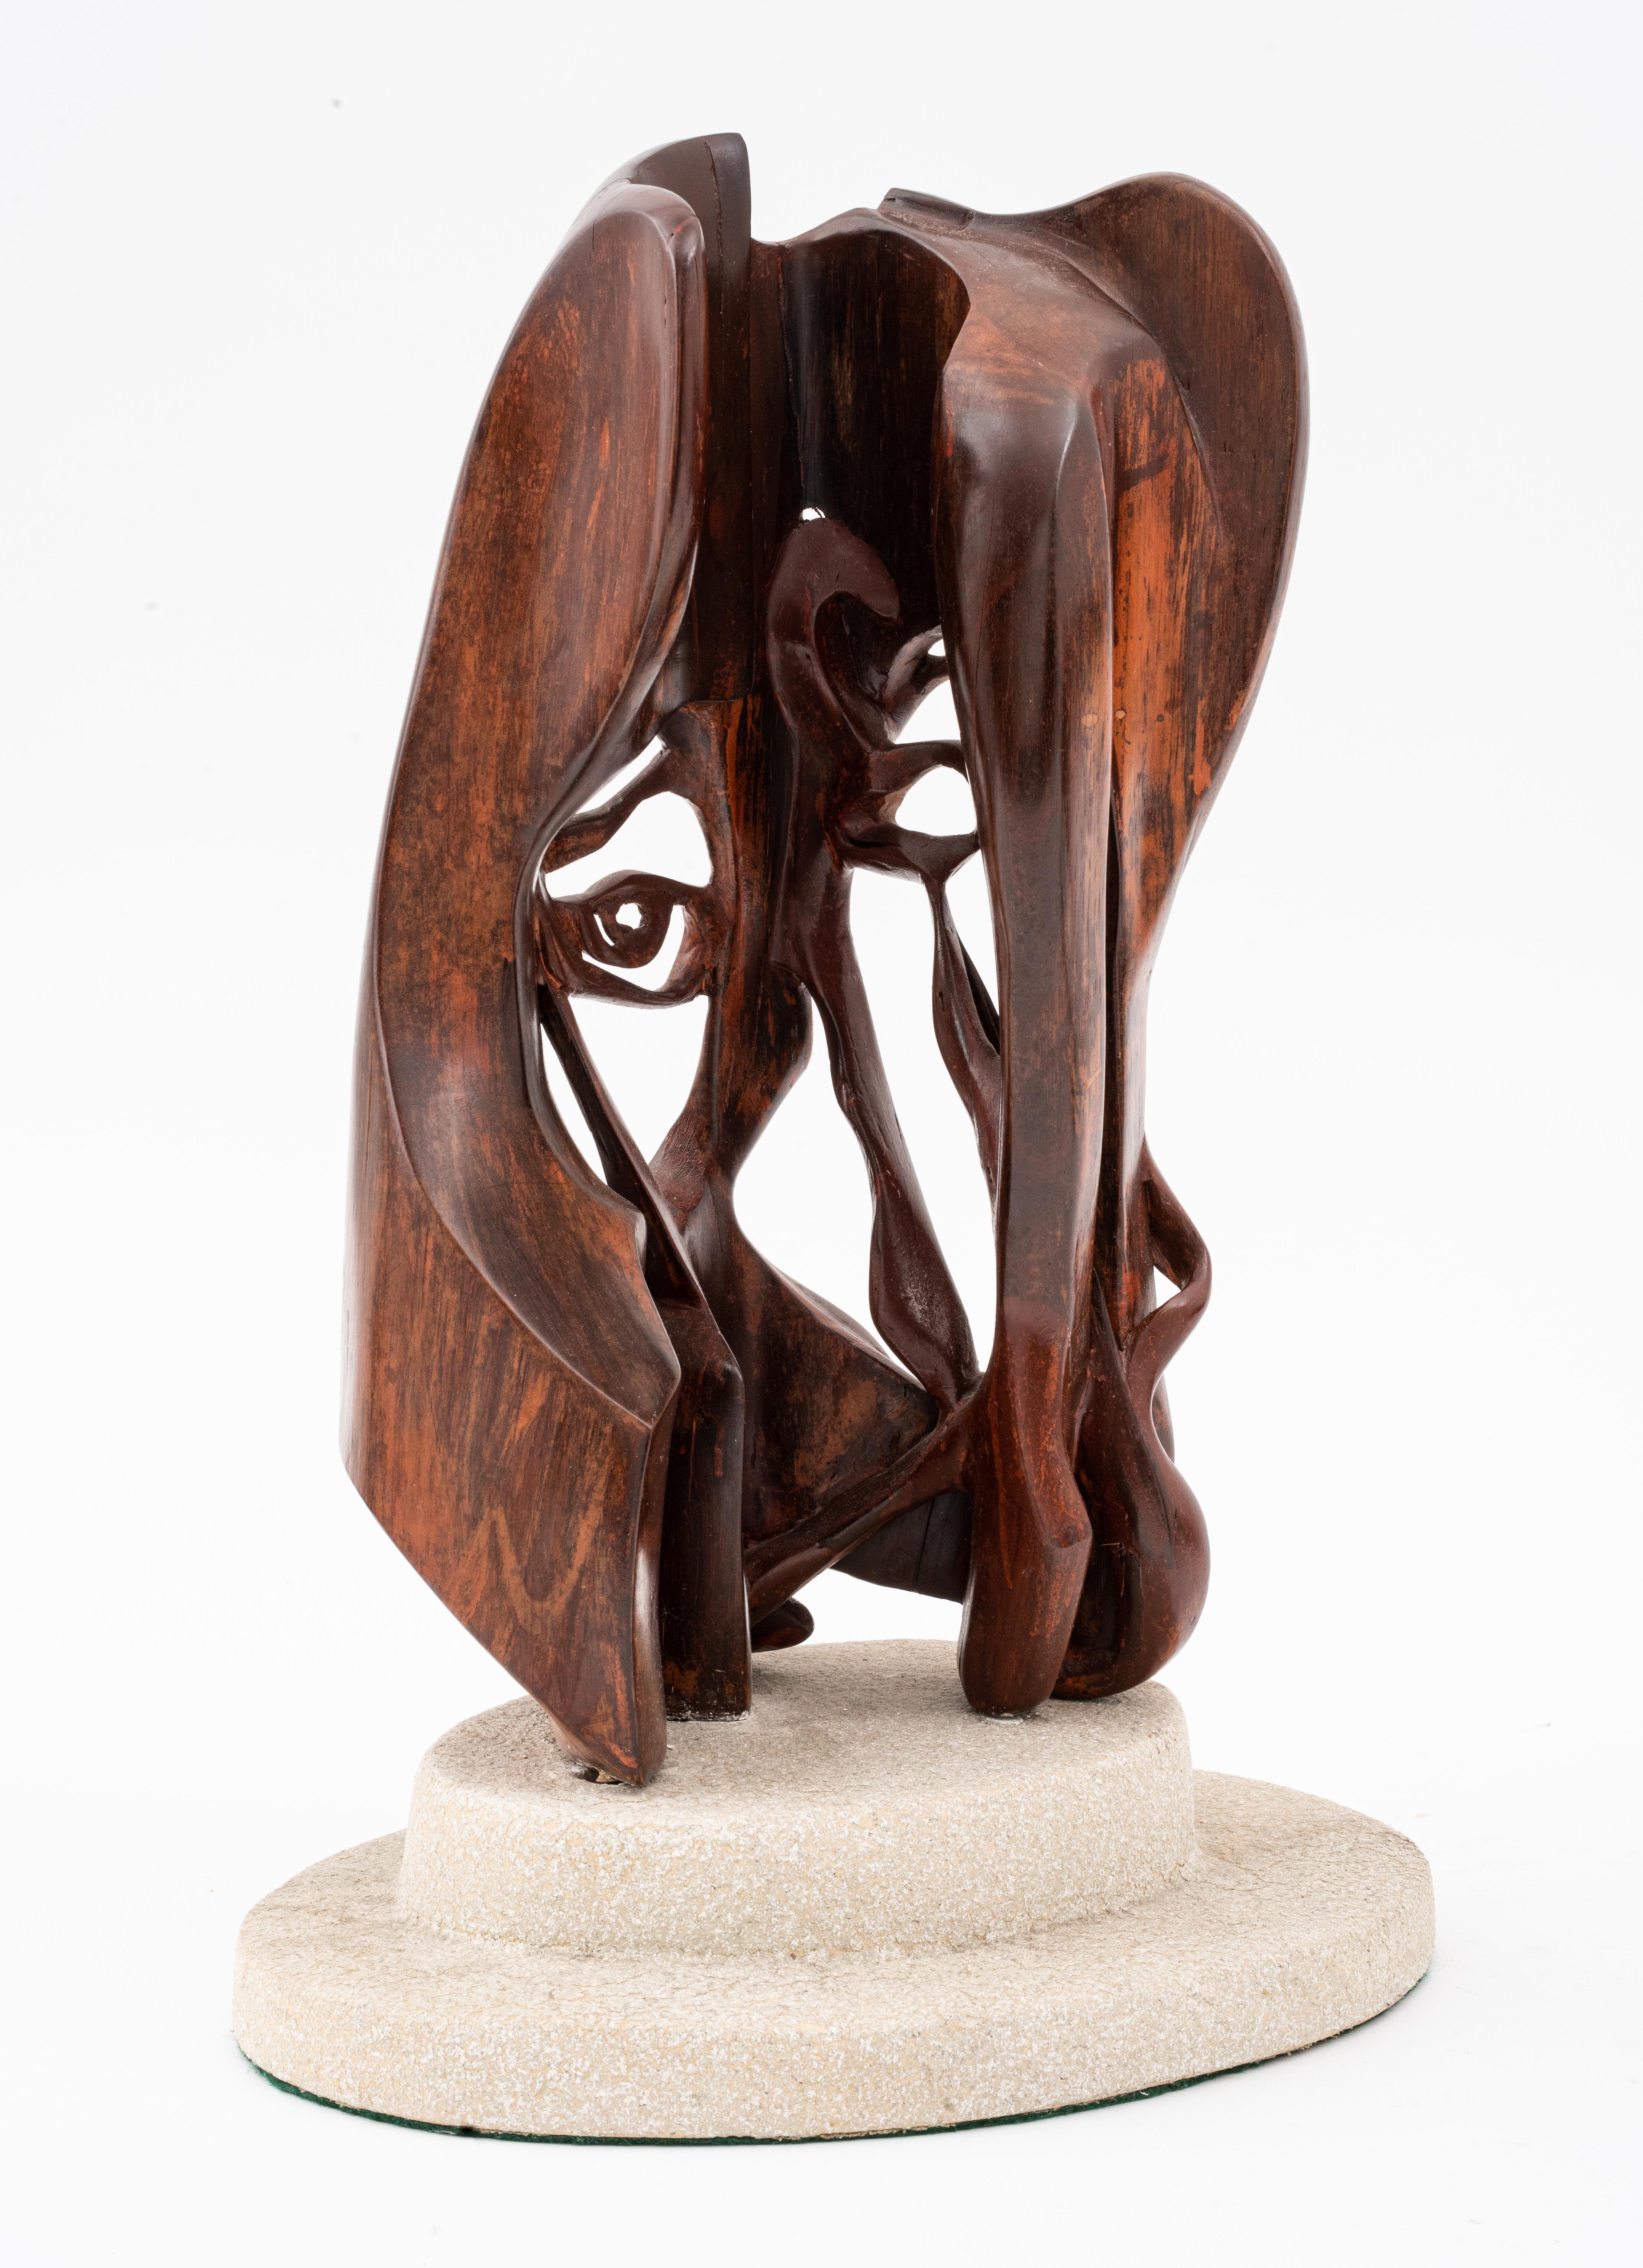 20th Century Modern Wood Carved Sculpture Depicting Face in Abstract Shapes  For Sale